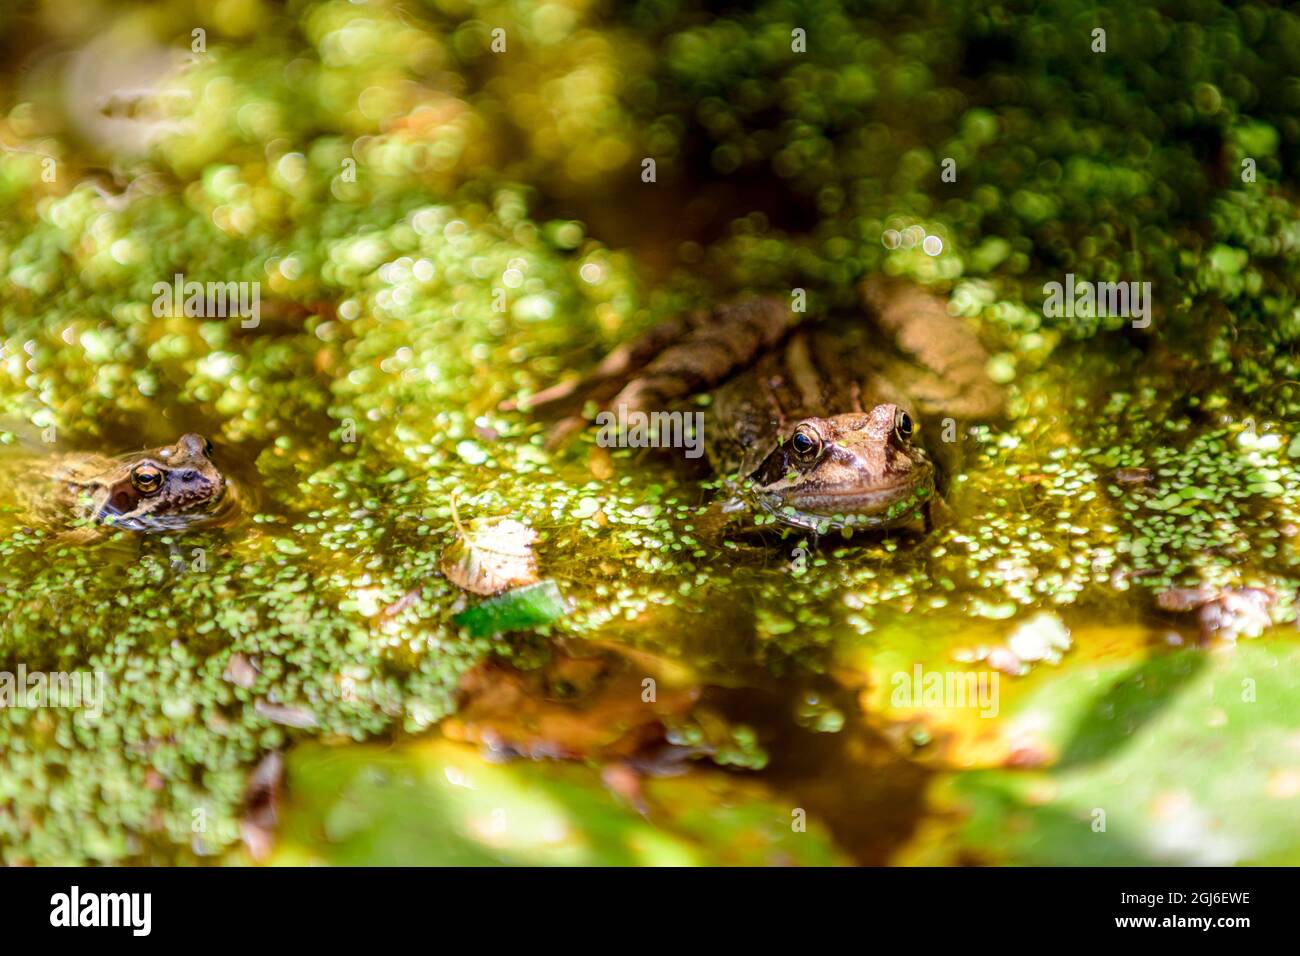 common frog Rana temporaria popping up through duckweed in a UK garden pond Stock Photo